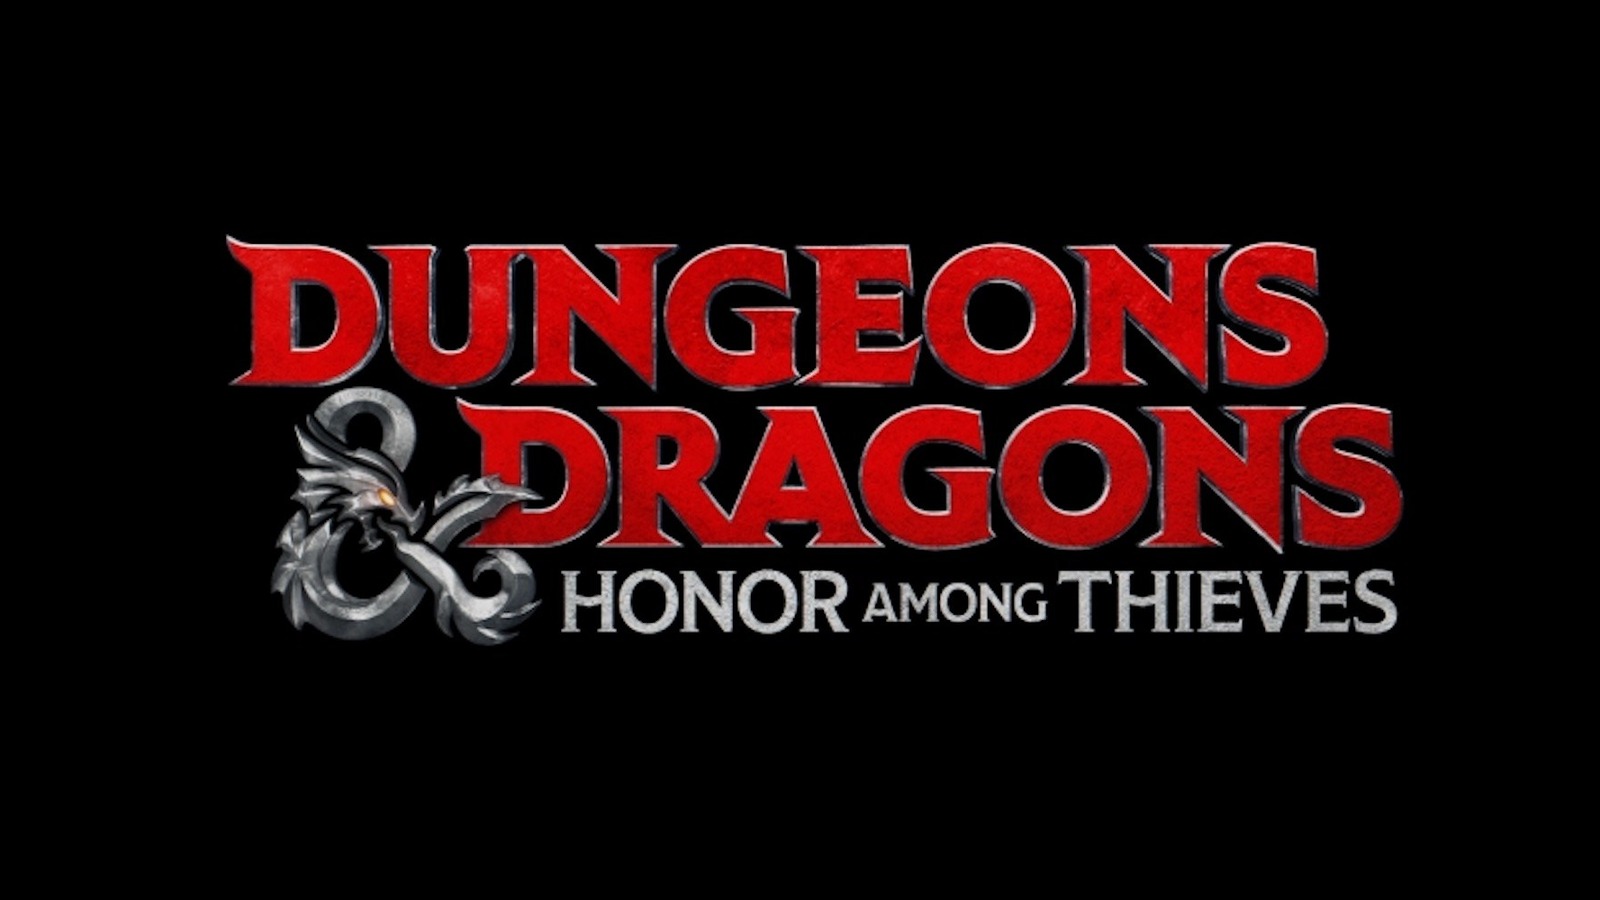 Paramount releases first trailer for 'Dungeons & Dragons: Honor Among Thieves'